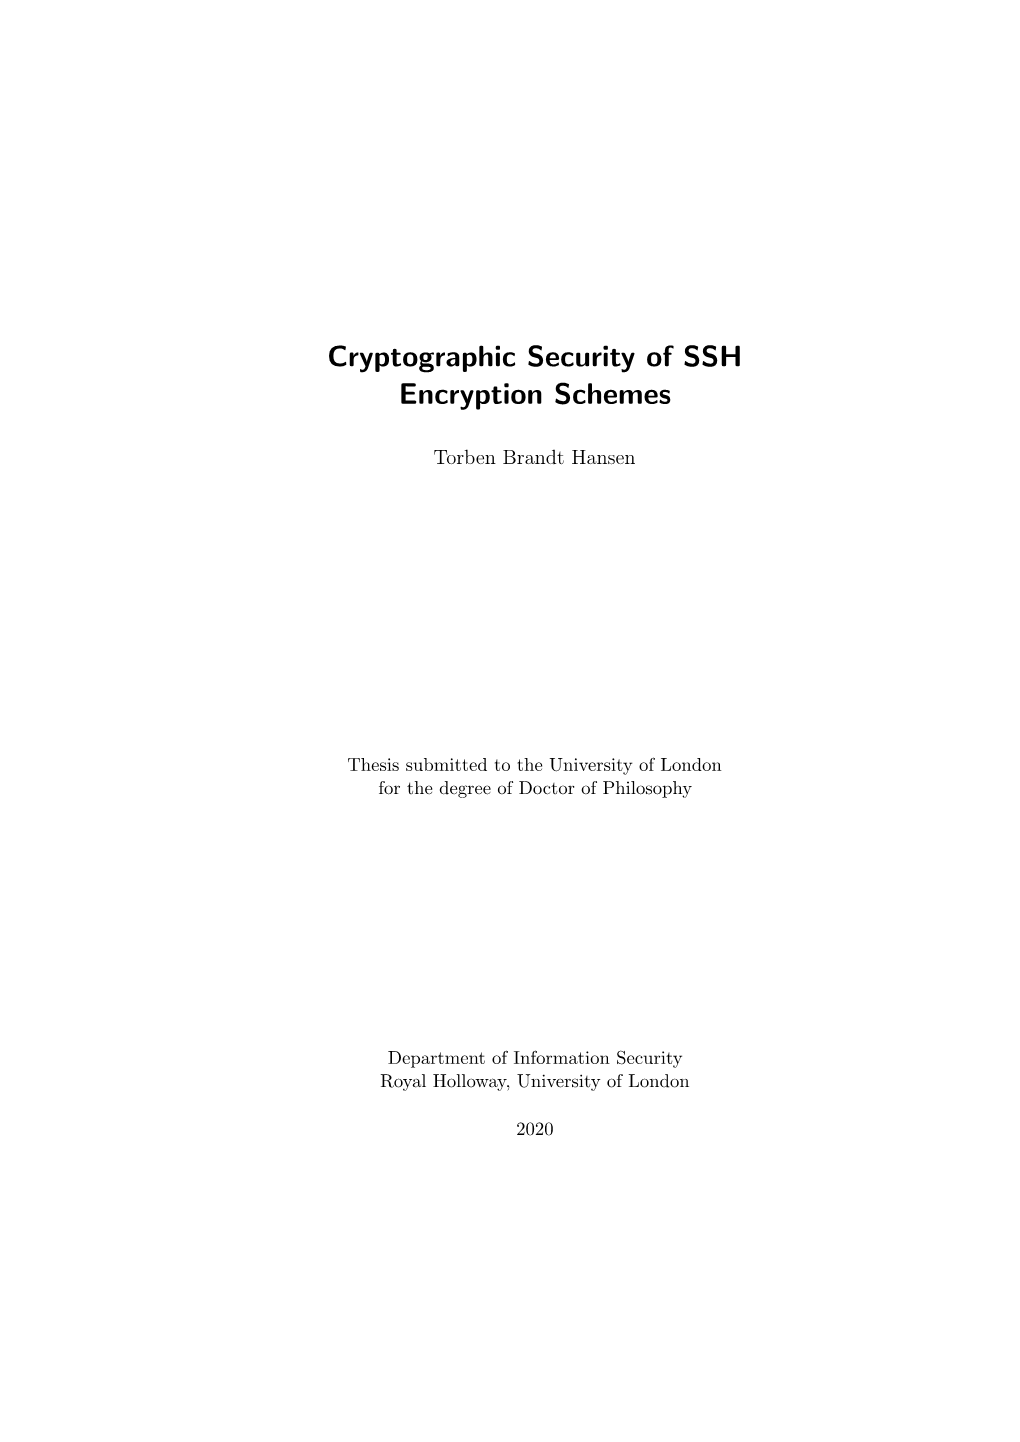 Cryptographic Security of SSH Encryption Schemes